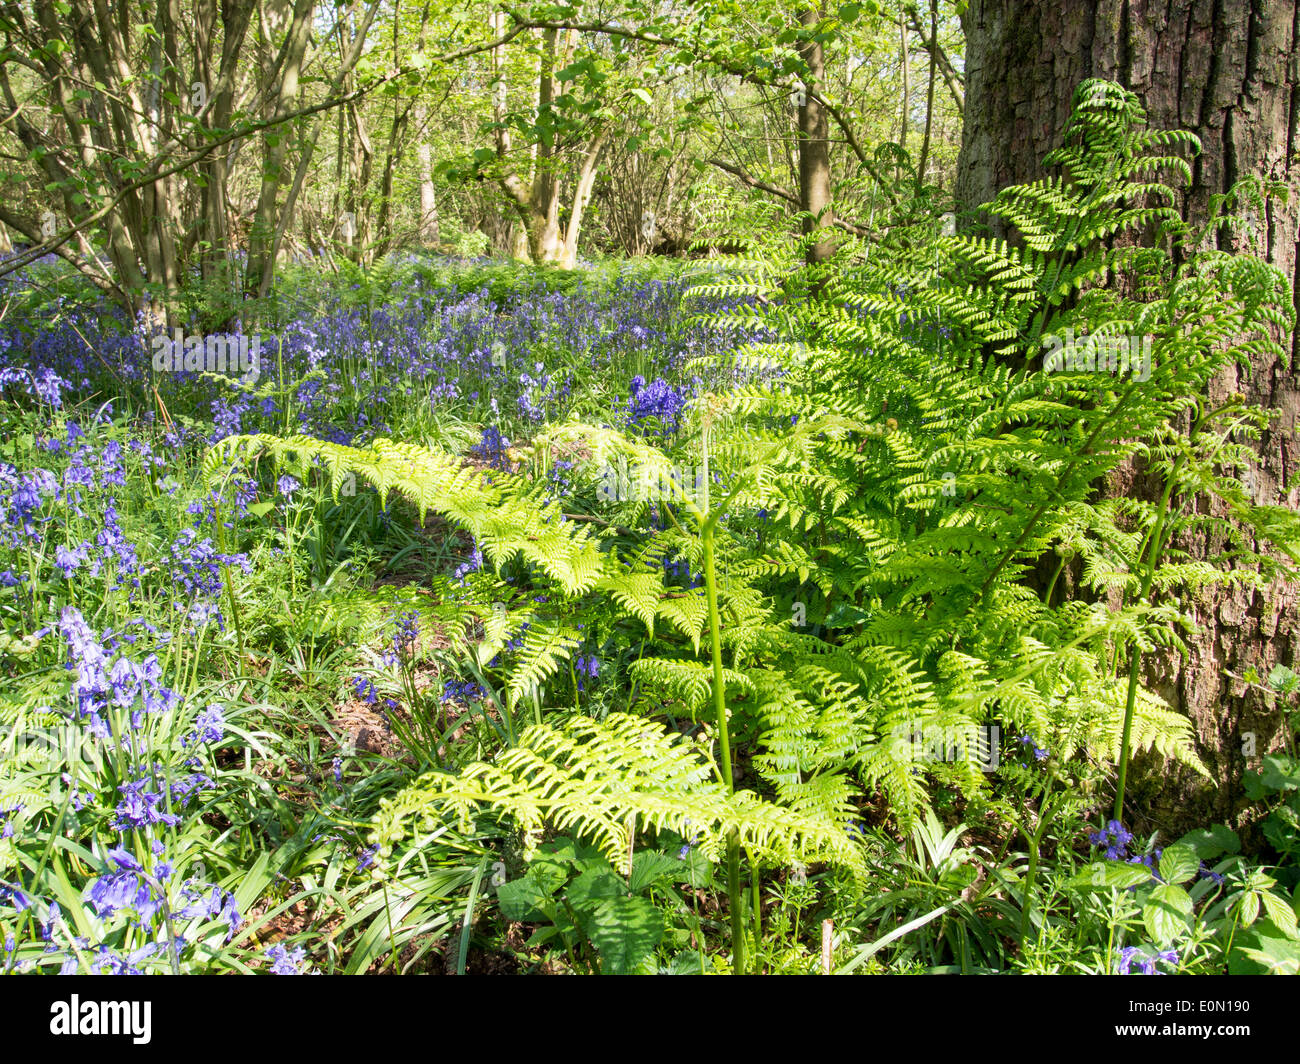 Bluebells and a Fern in a forest Stock Photo